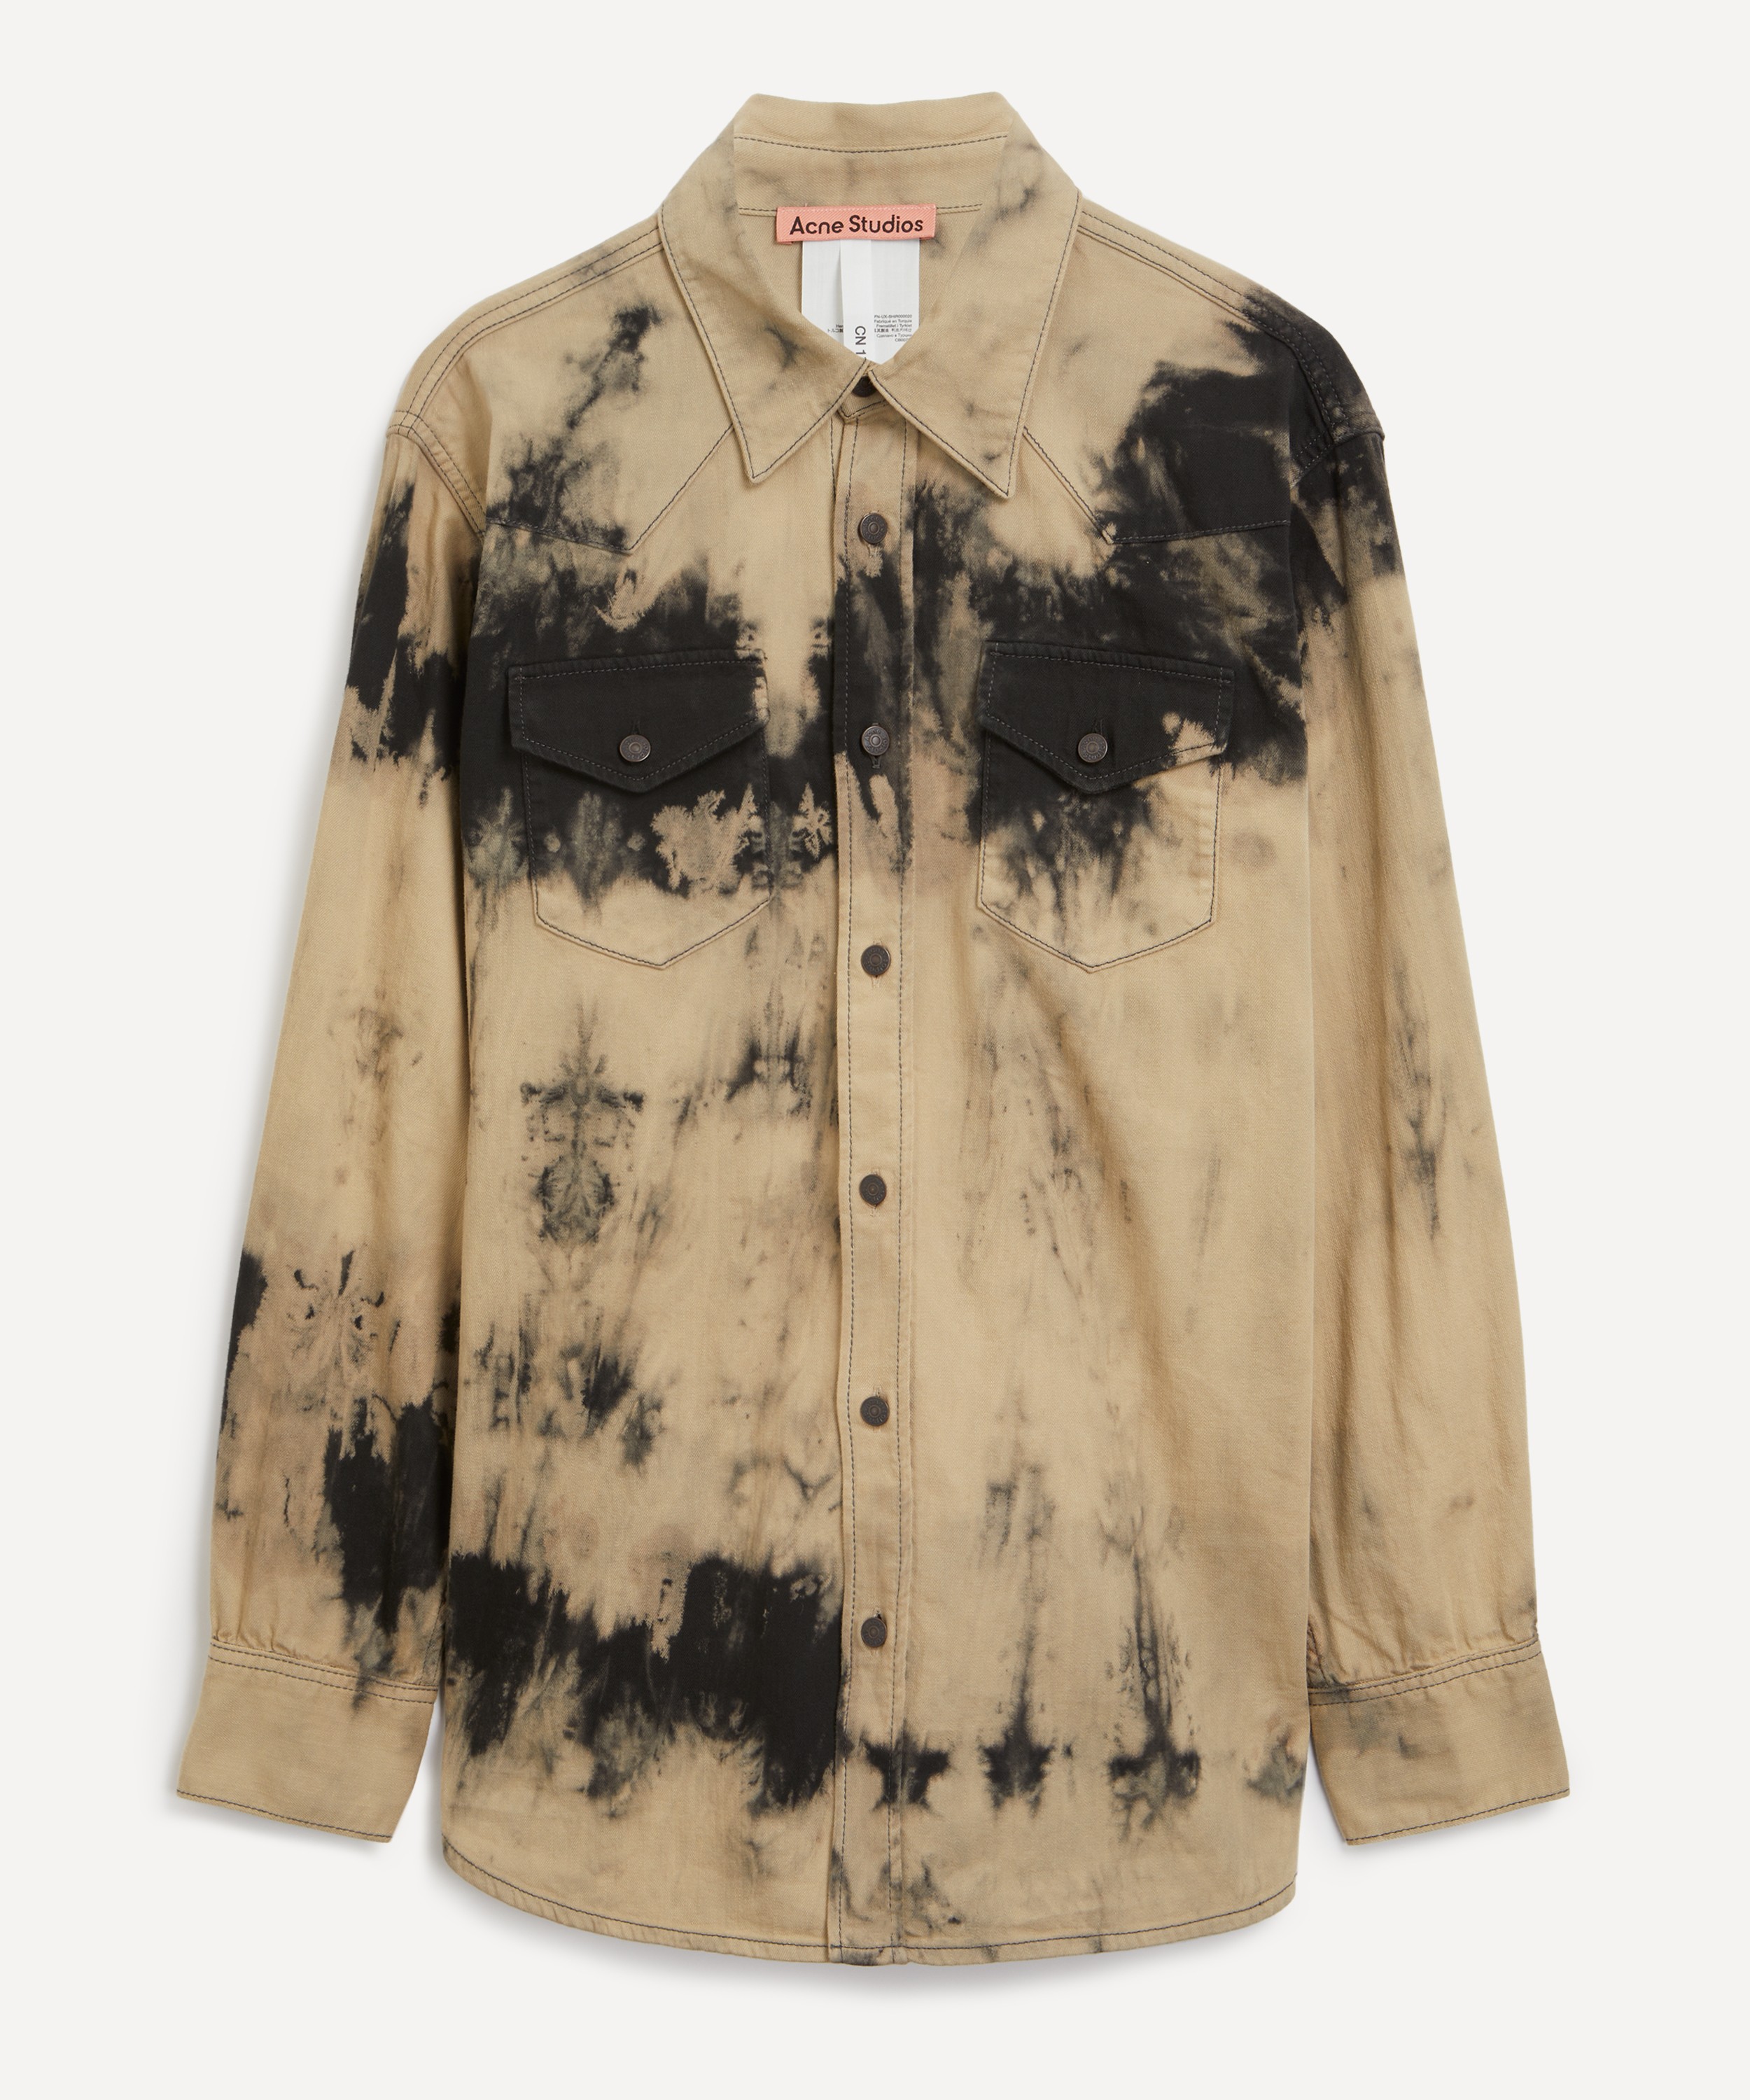 Acne Studios - Smokey Relaxed Fit Overshirt